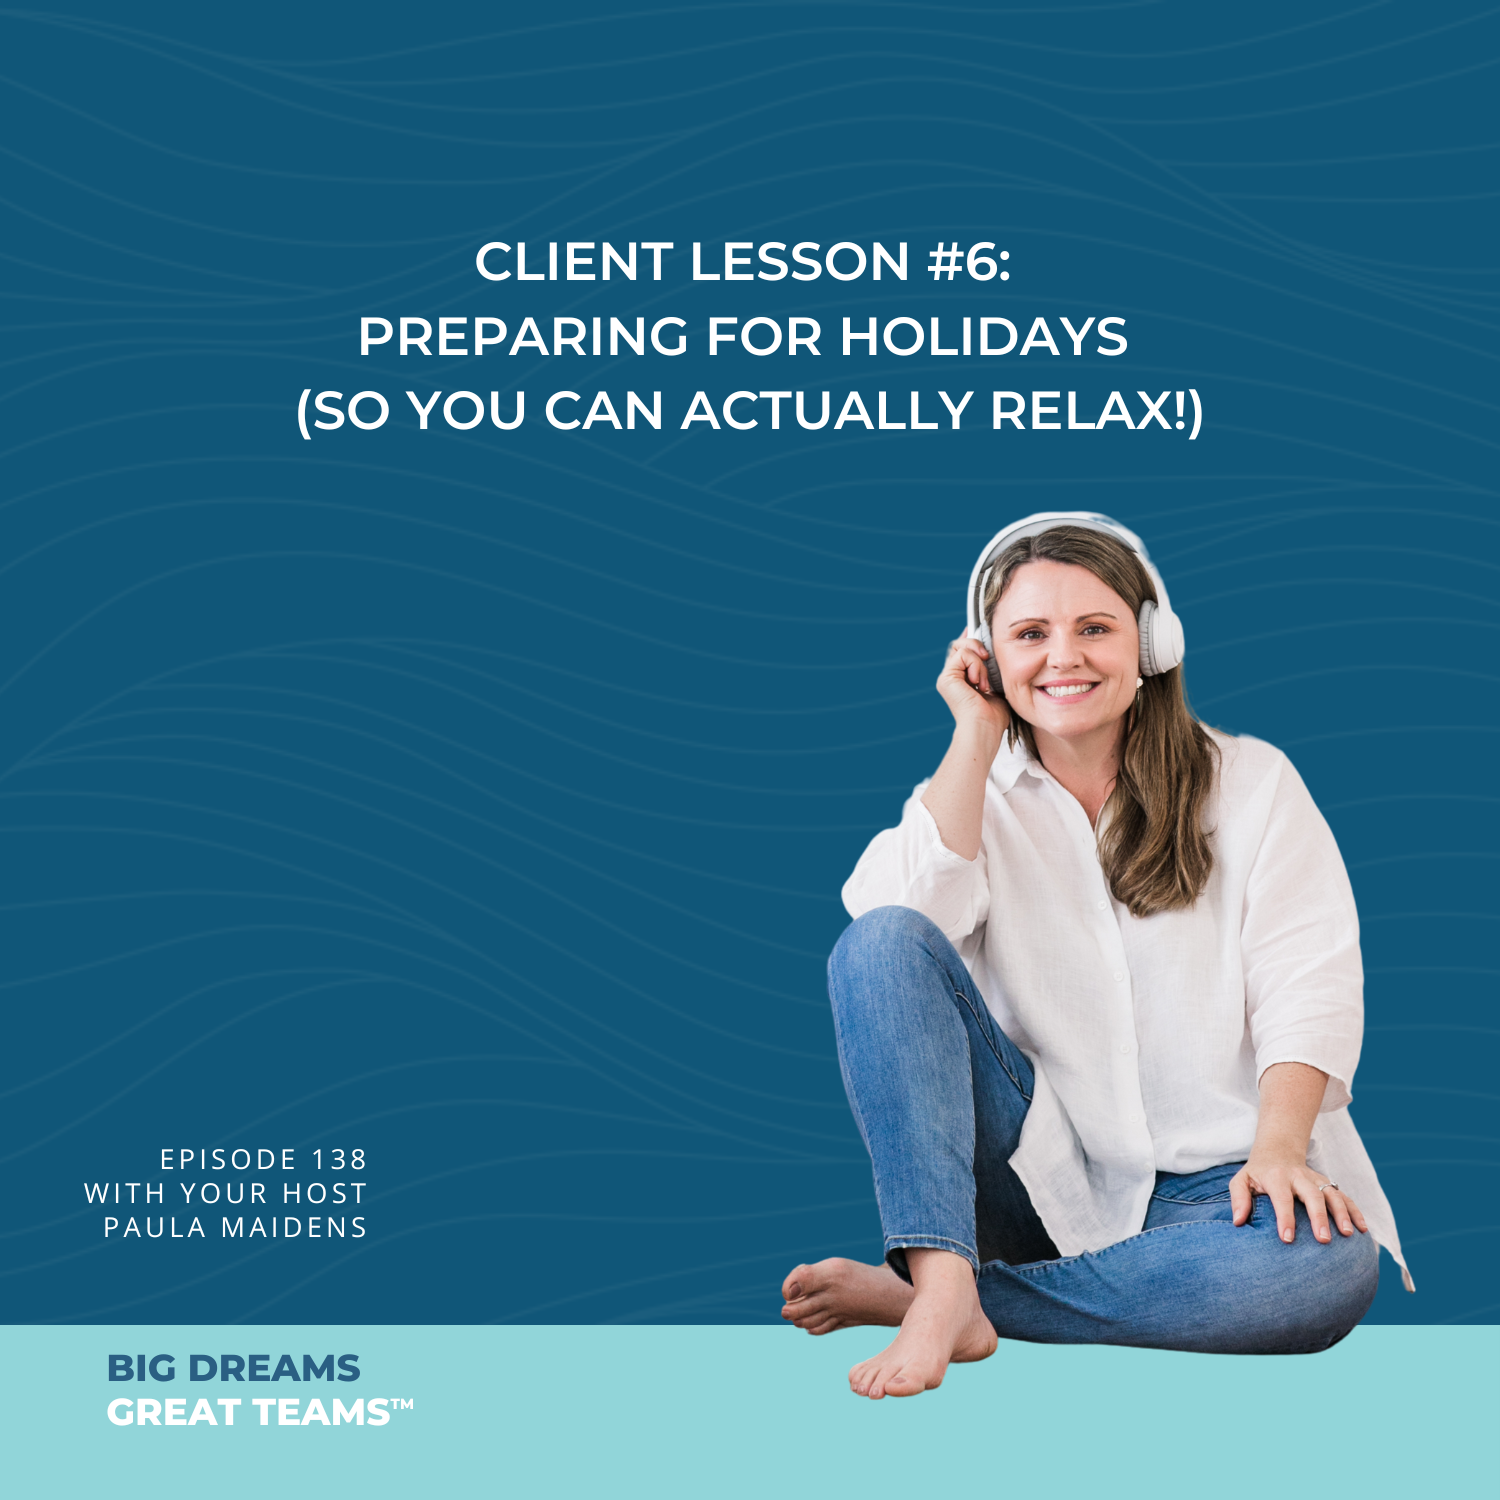 Episode 138 - Client Lesson #6: Preparing for Holidays (so you can actually relax!)